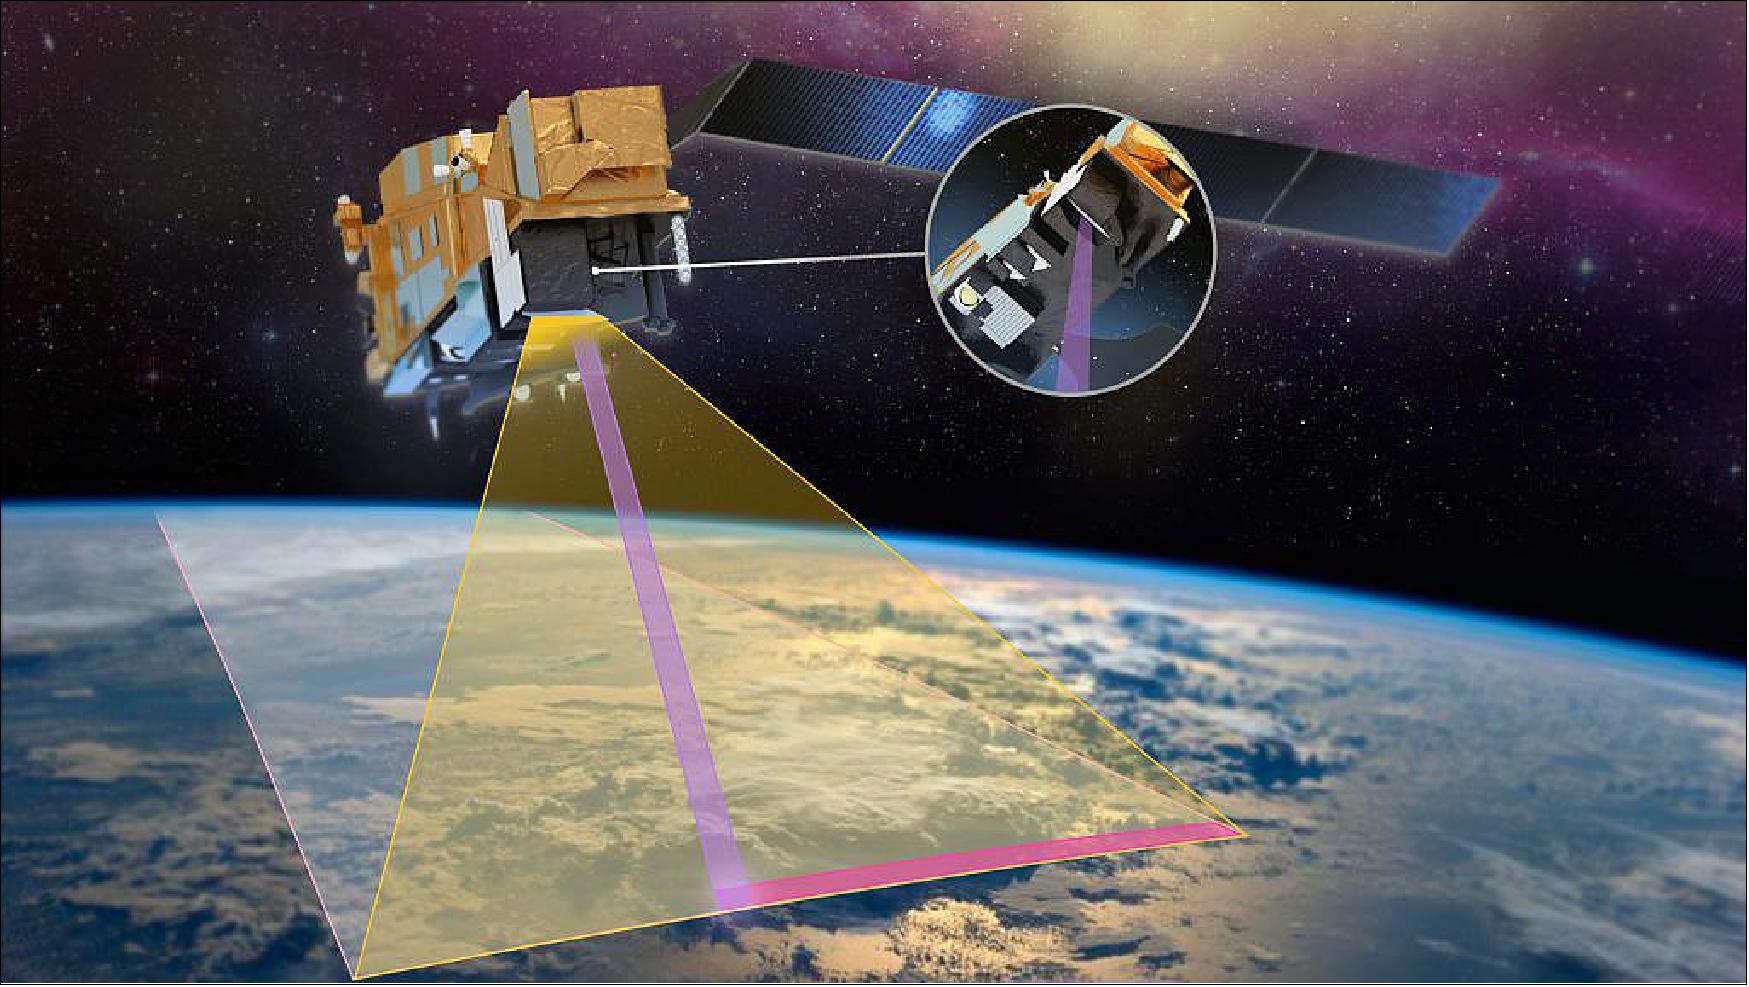 Figure 9: Artist's illustration of the instantaneous swath projection by the METimage instrument (image credit: Airbus DS)